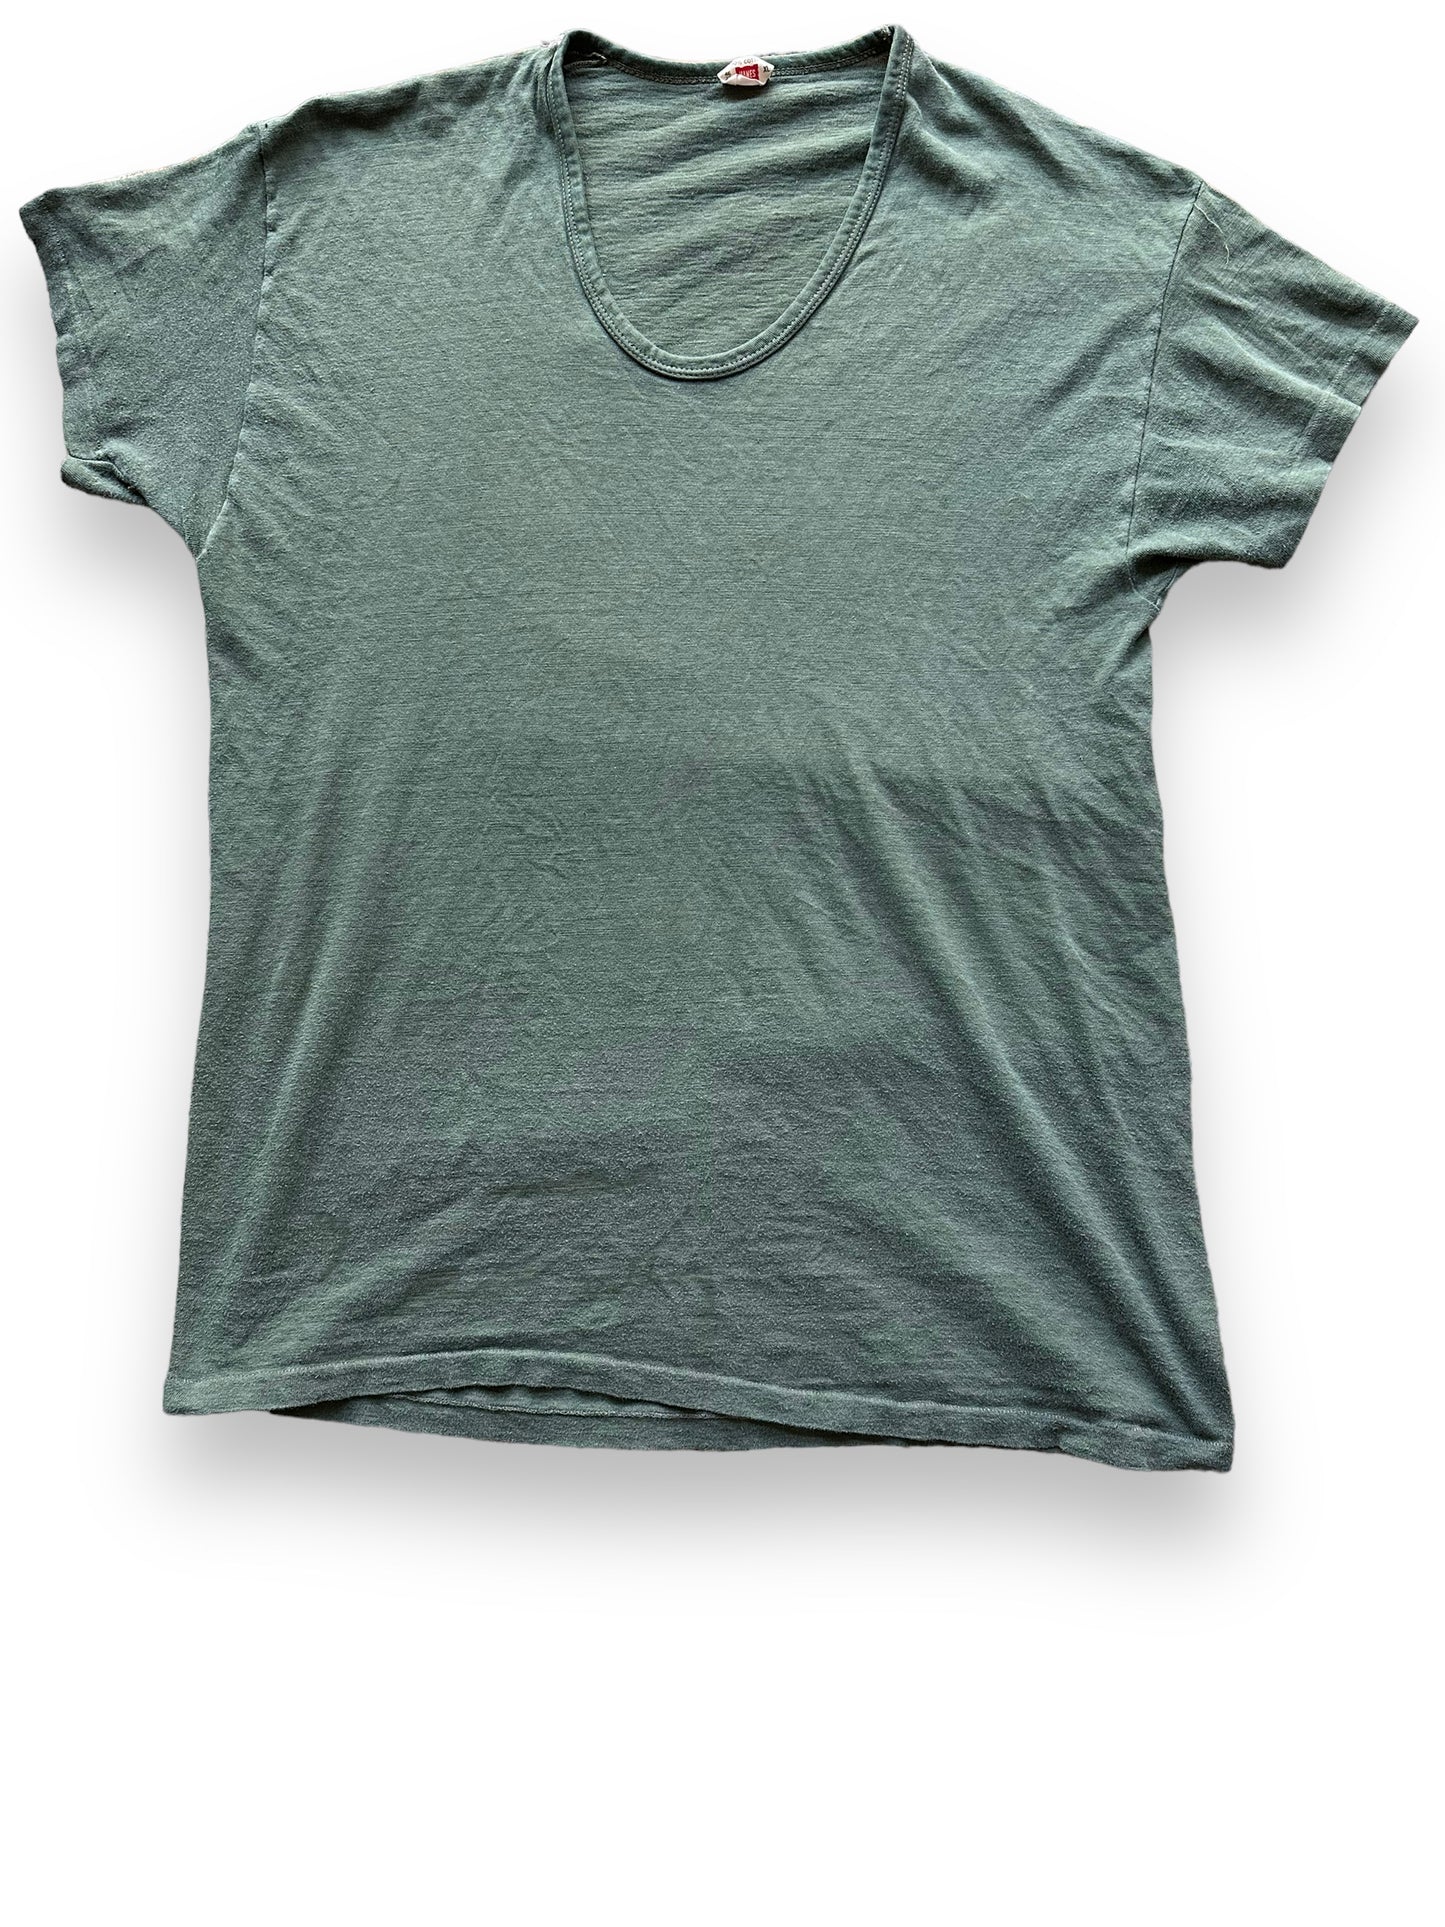 Front View of Vintage Green Hanes Blank Tee SZ XL | Vintage Blank T-Shirts Seattle | Barn Owl Vintage Tees Seattle